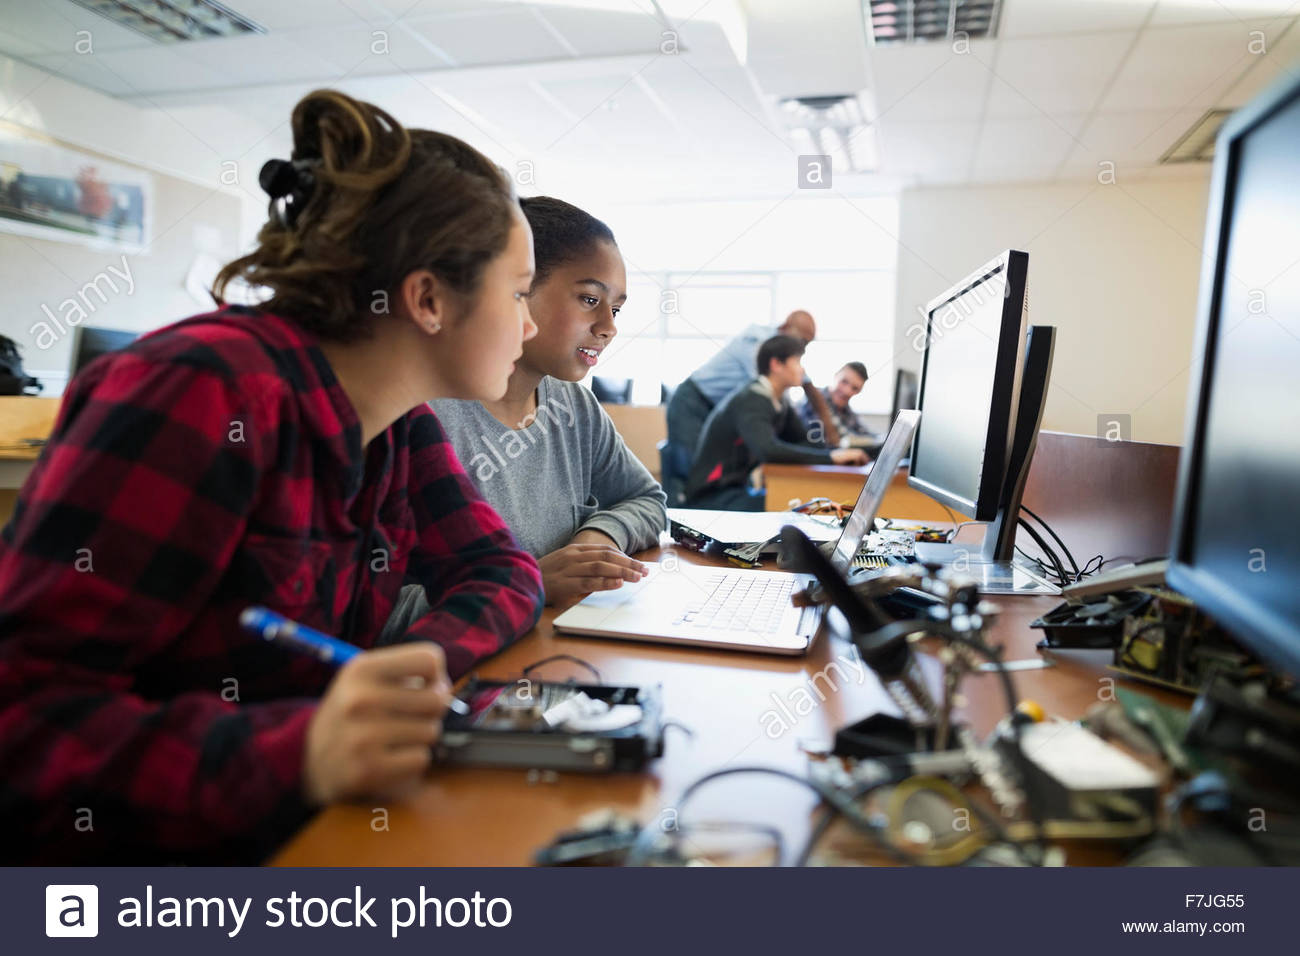 High school students with laptop computer science class Stock Photo